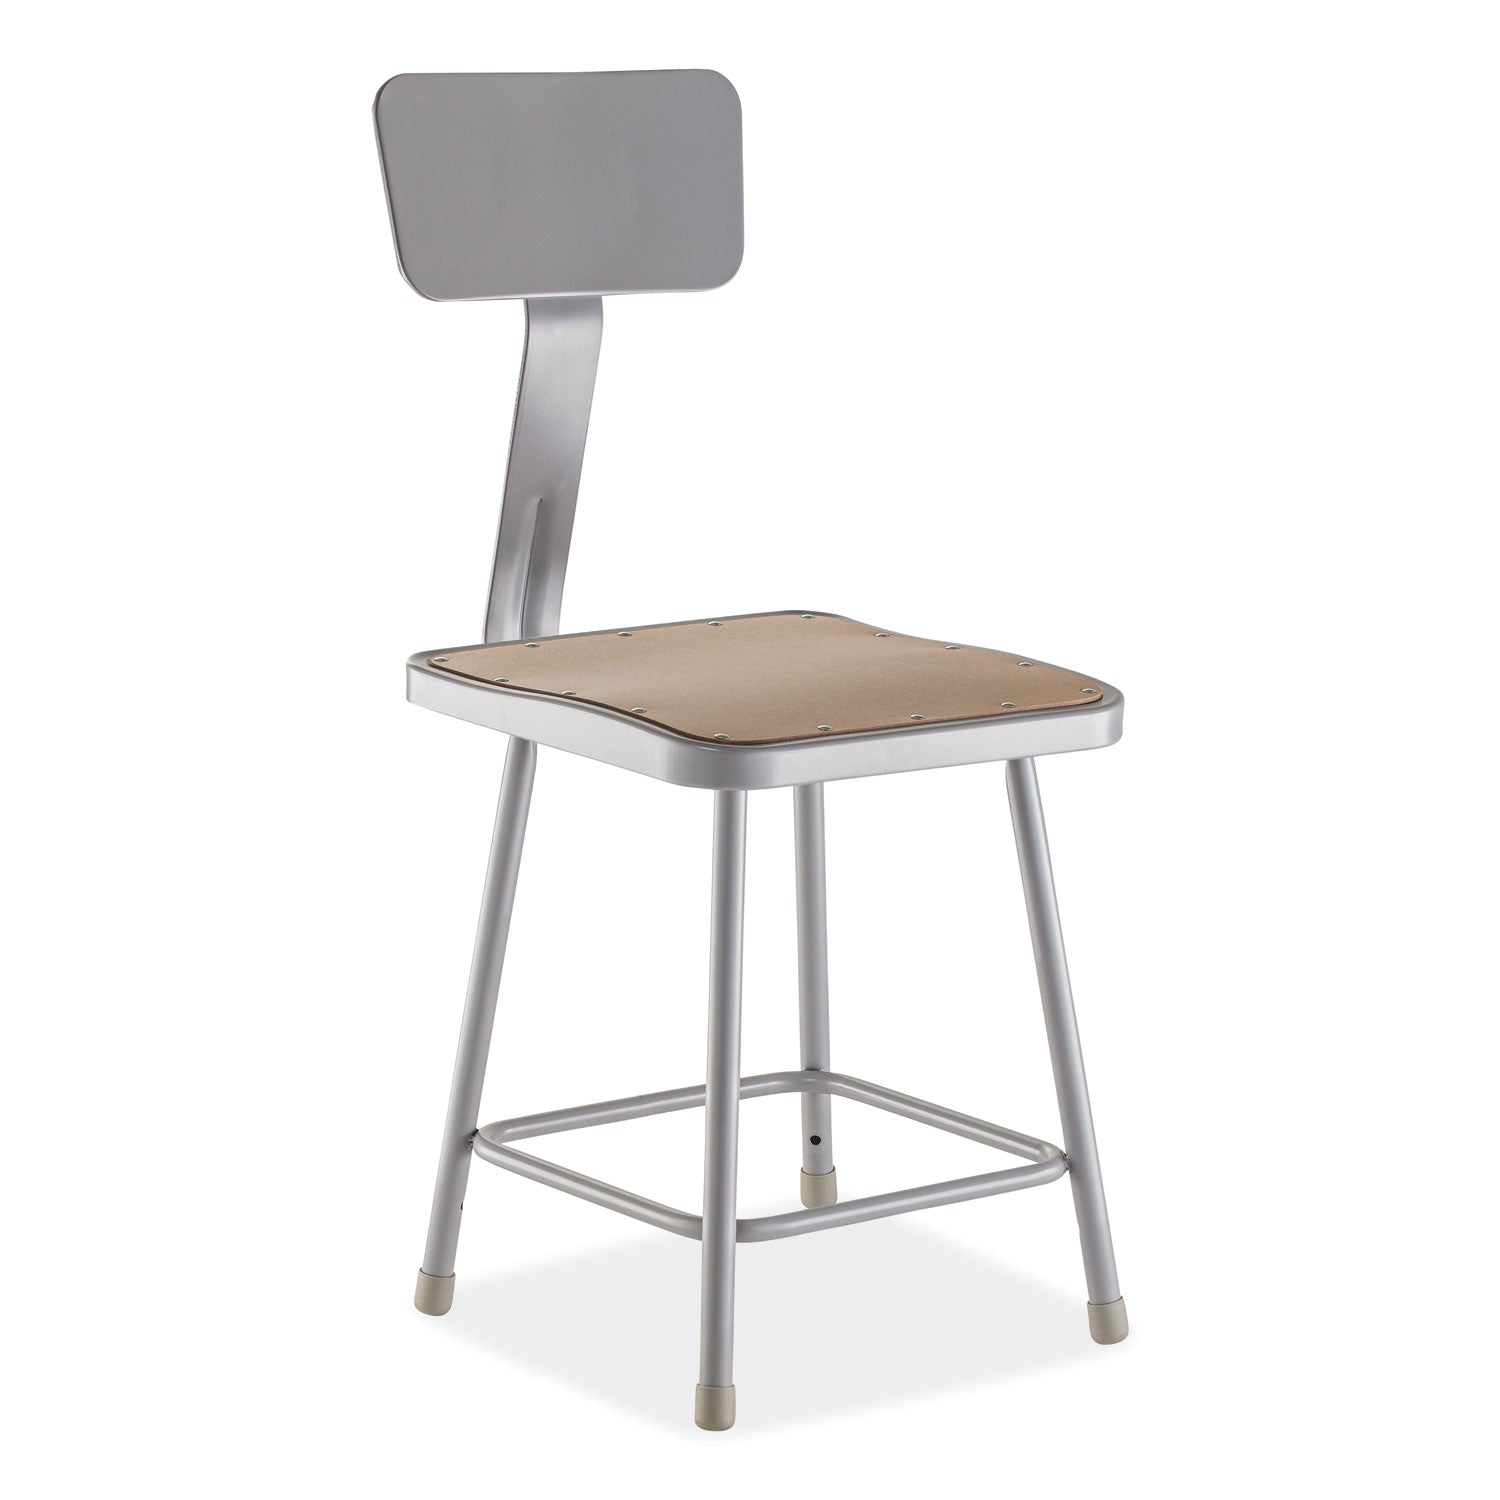 6300-series-hd-square-seat-stool-w-backrest-supports-500-lb-175-seat-ht-brown-seatgray-back-base-ships-in-1-3-bus-days_nps6318b - 3